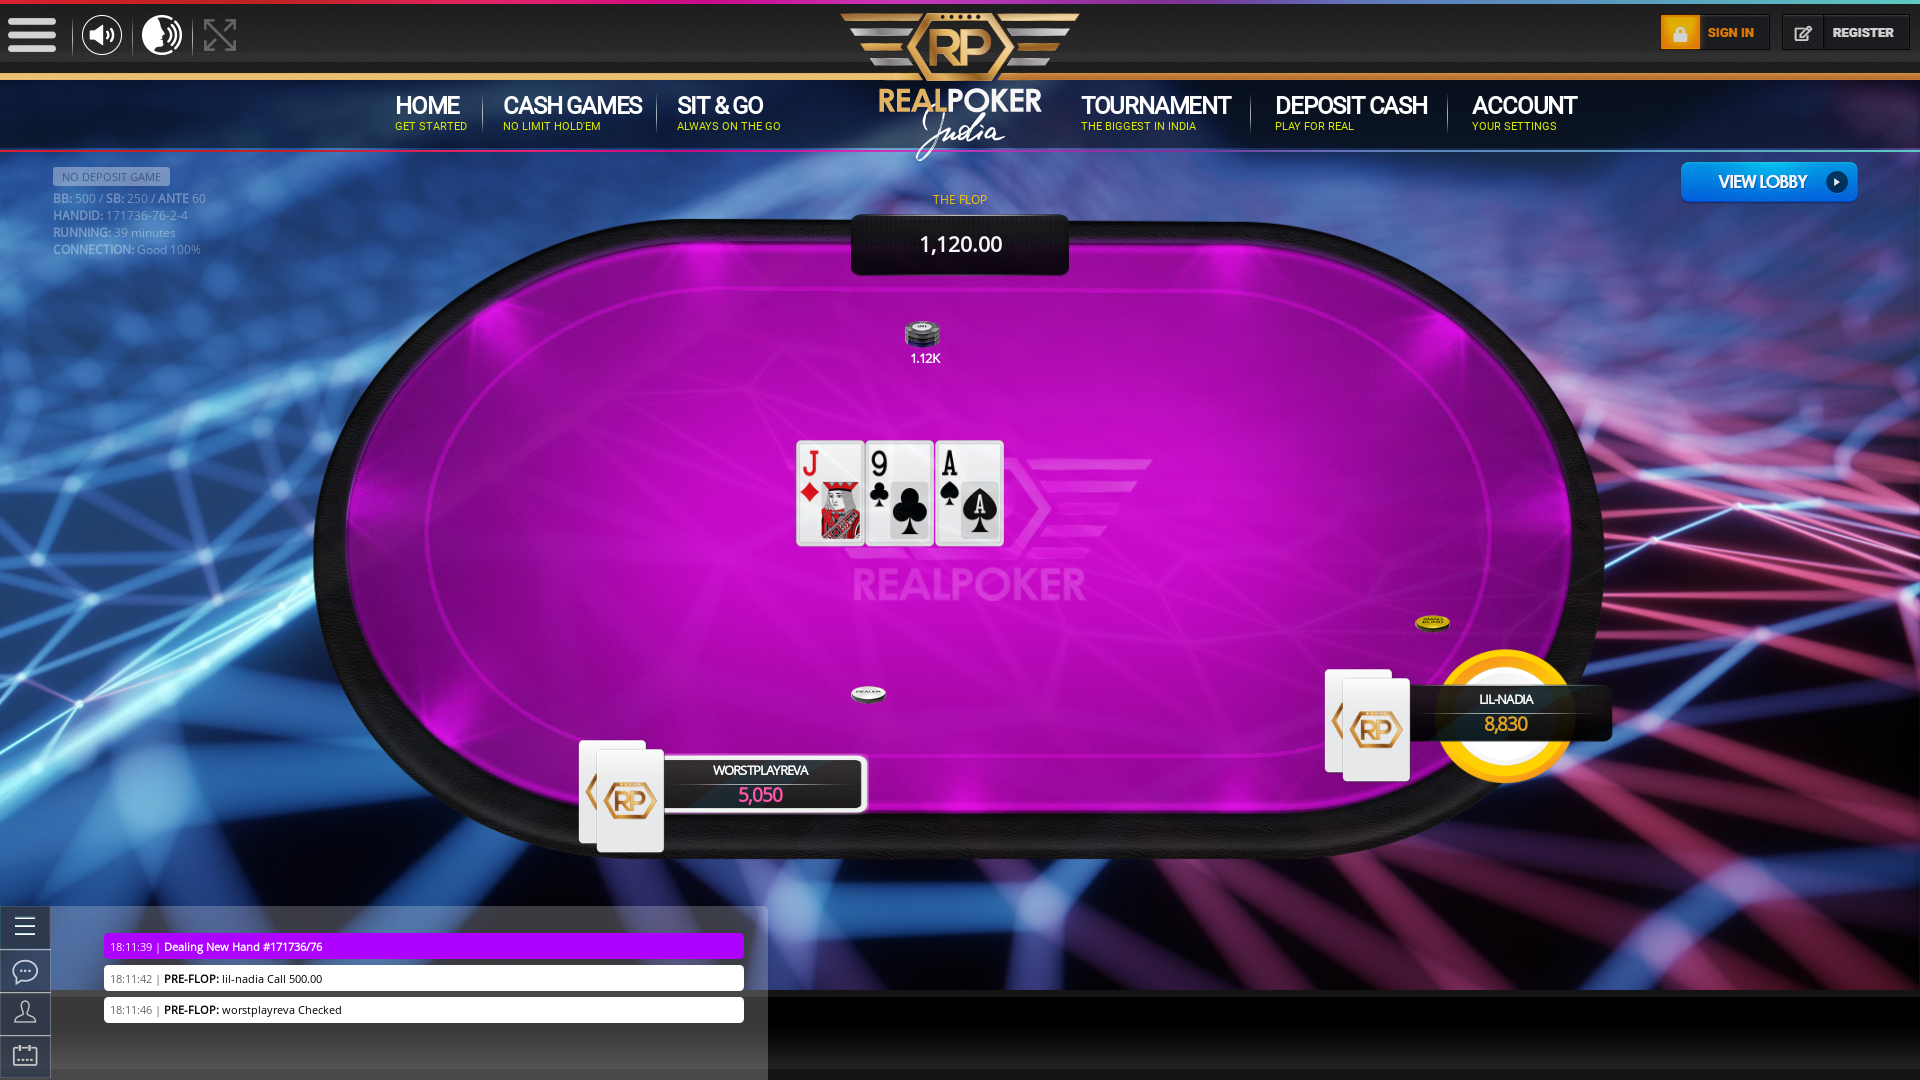 Vijayanagar, Bangalore poker table on a 10 player table in the 39th minute of the game